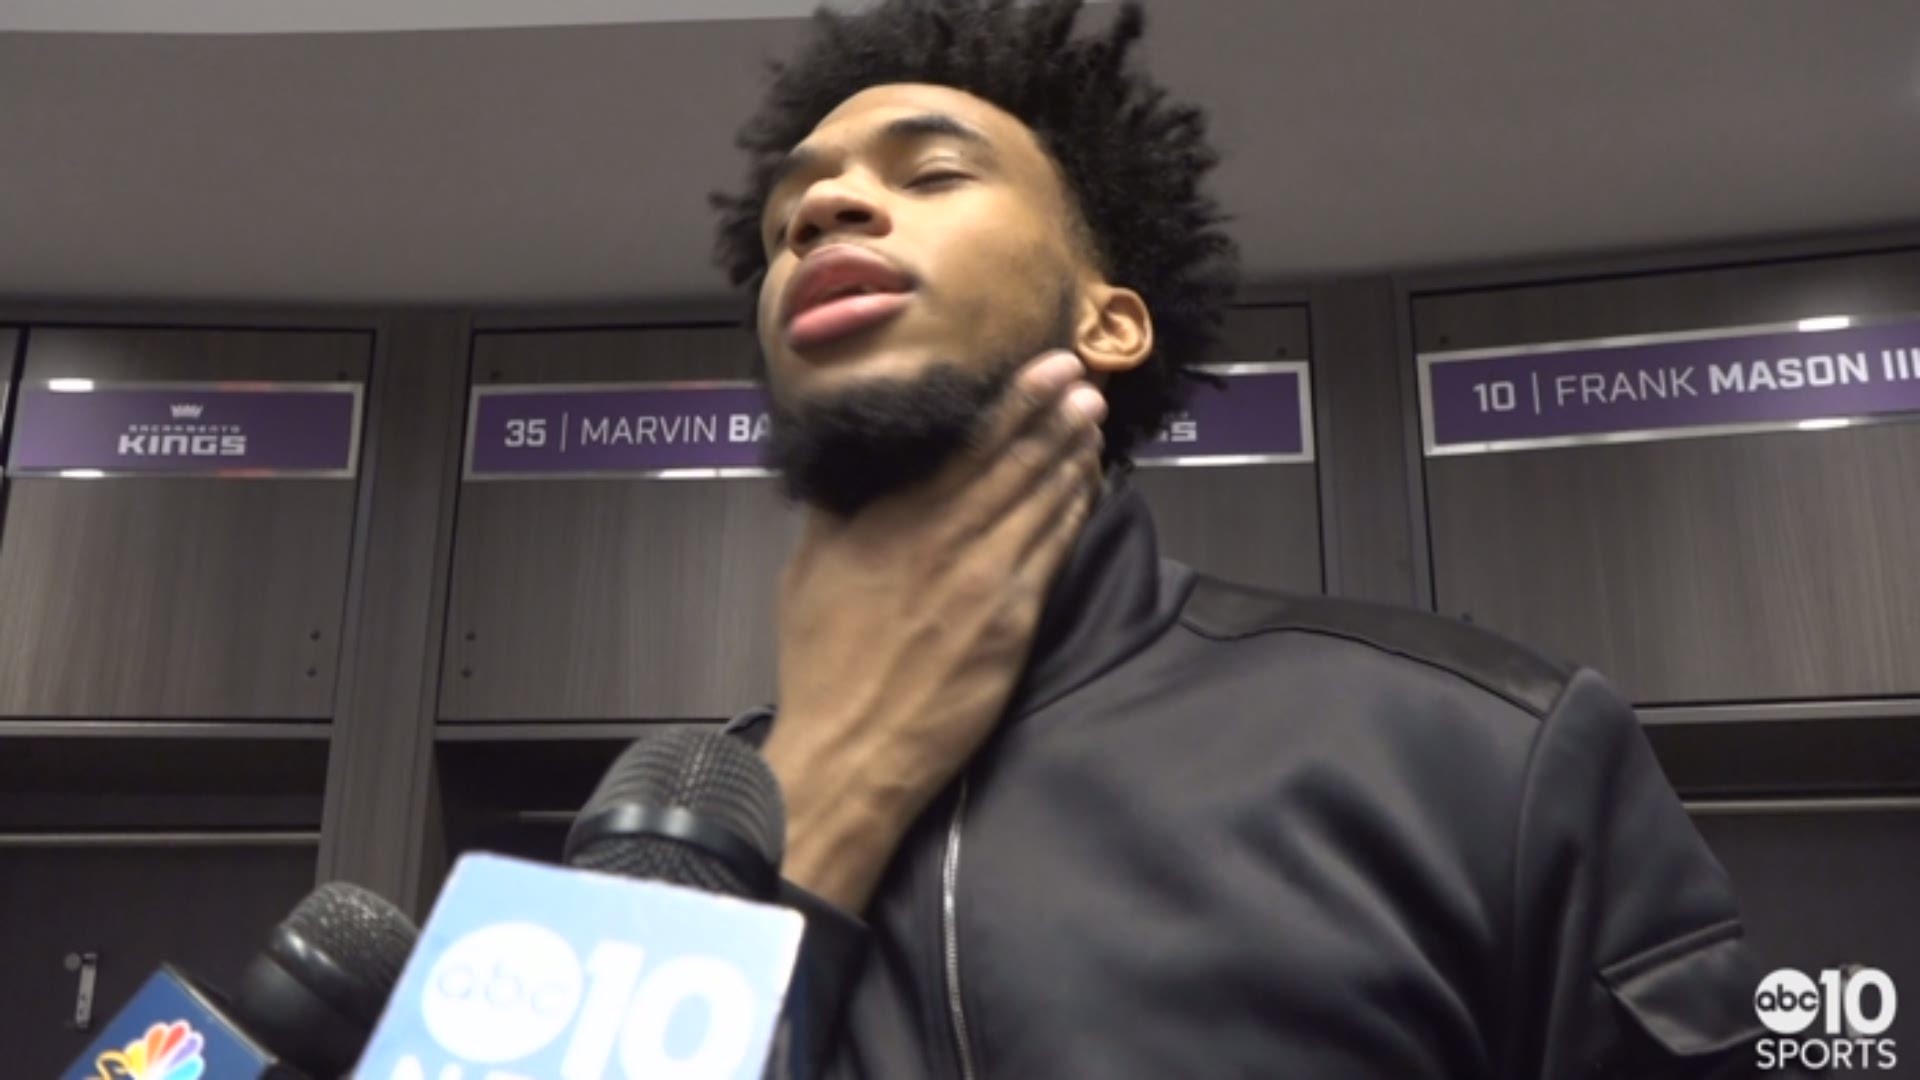 Kings rookie big-man Marvin Bagley III talks about the bench's effort, playing alongside Harry Giles, getting his first technical and feeling like himself again after missing time due to injury, following Saturday's win over the Charlotte Hornets.